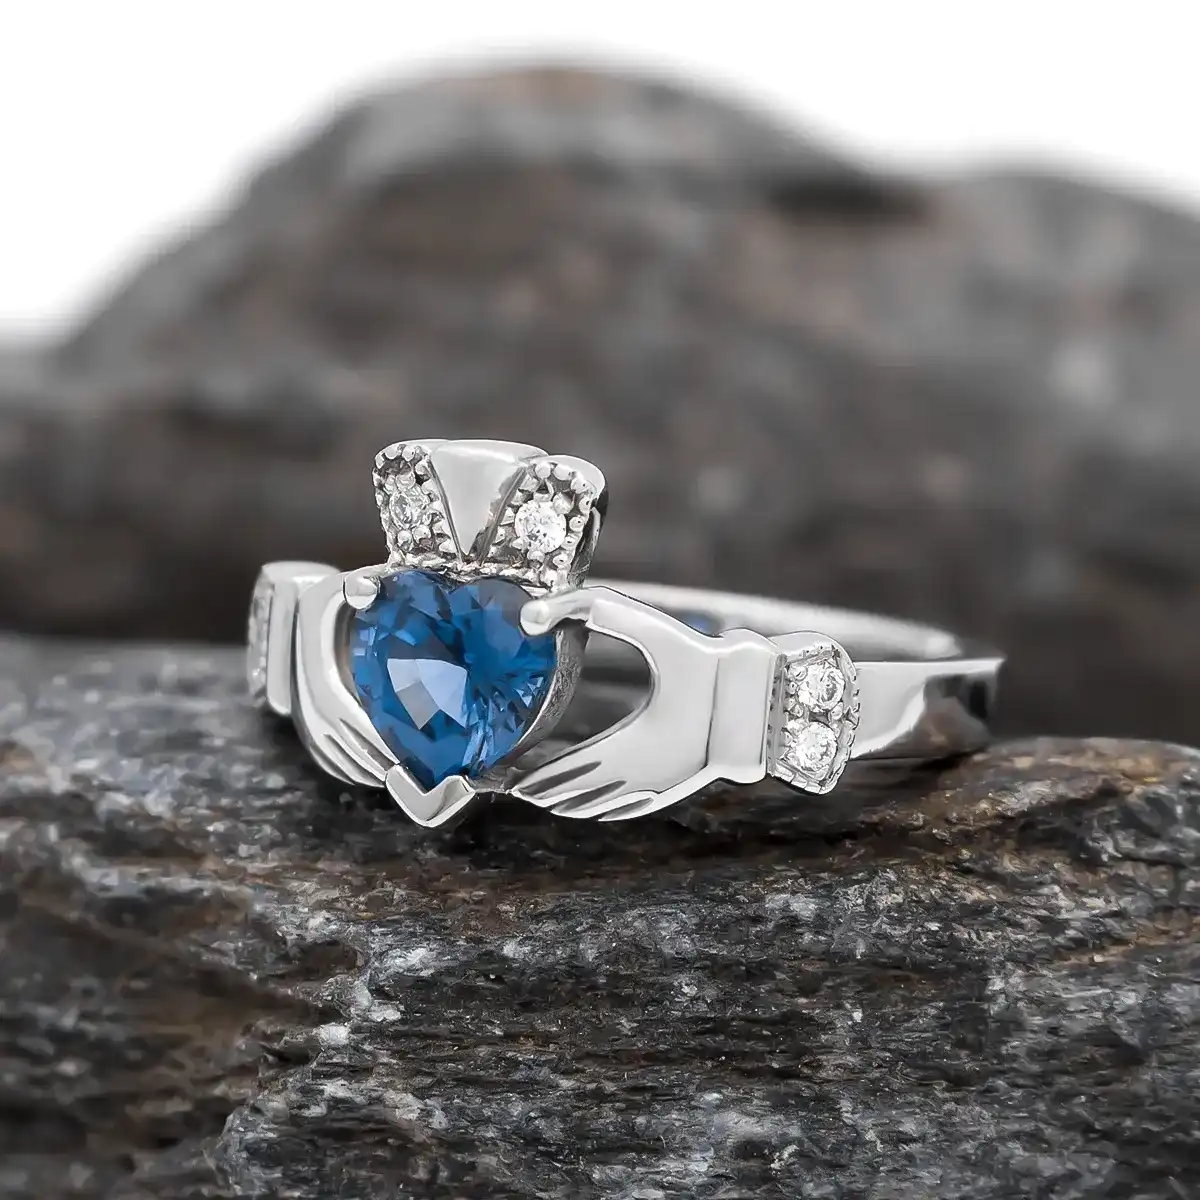 White Gold Claddagh Ring with Sapphire and Diamond...